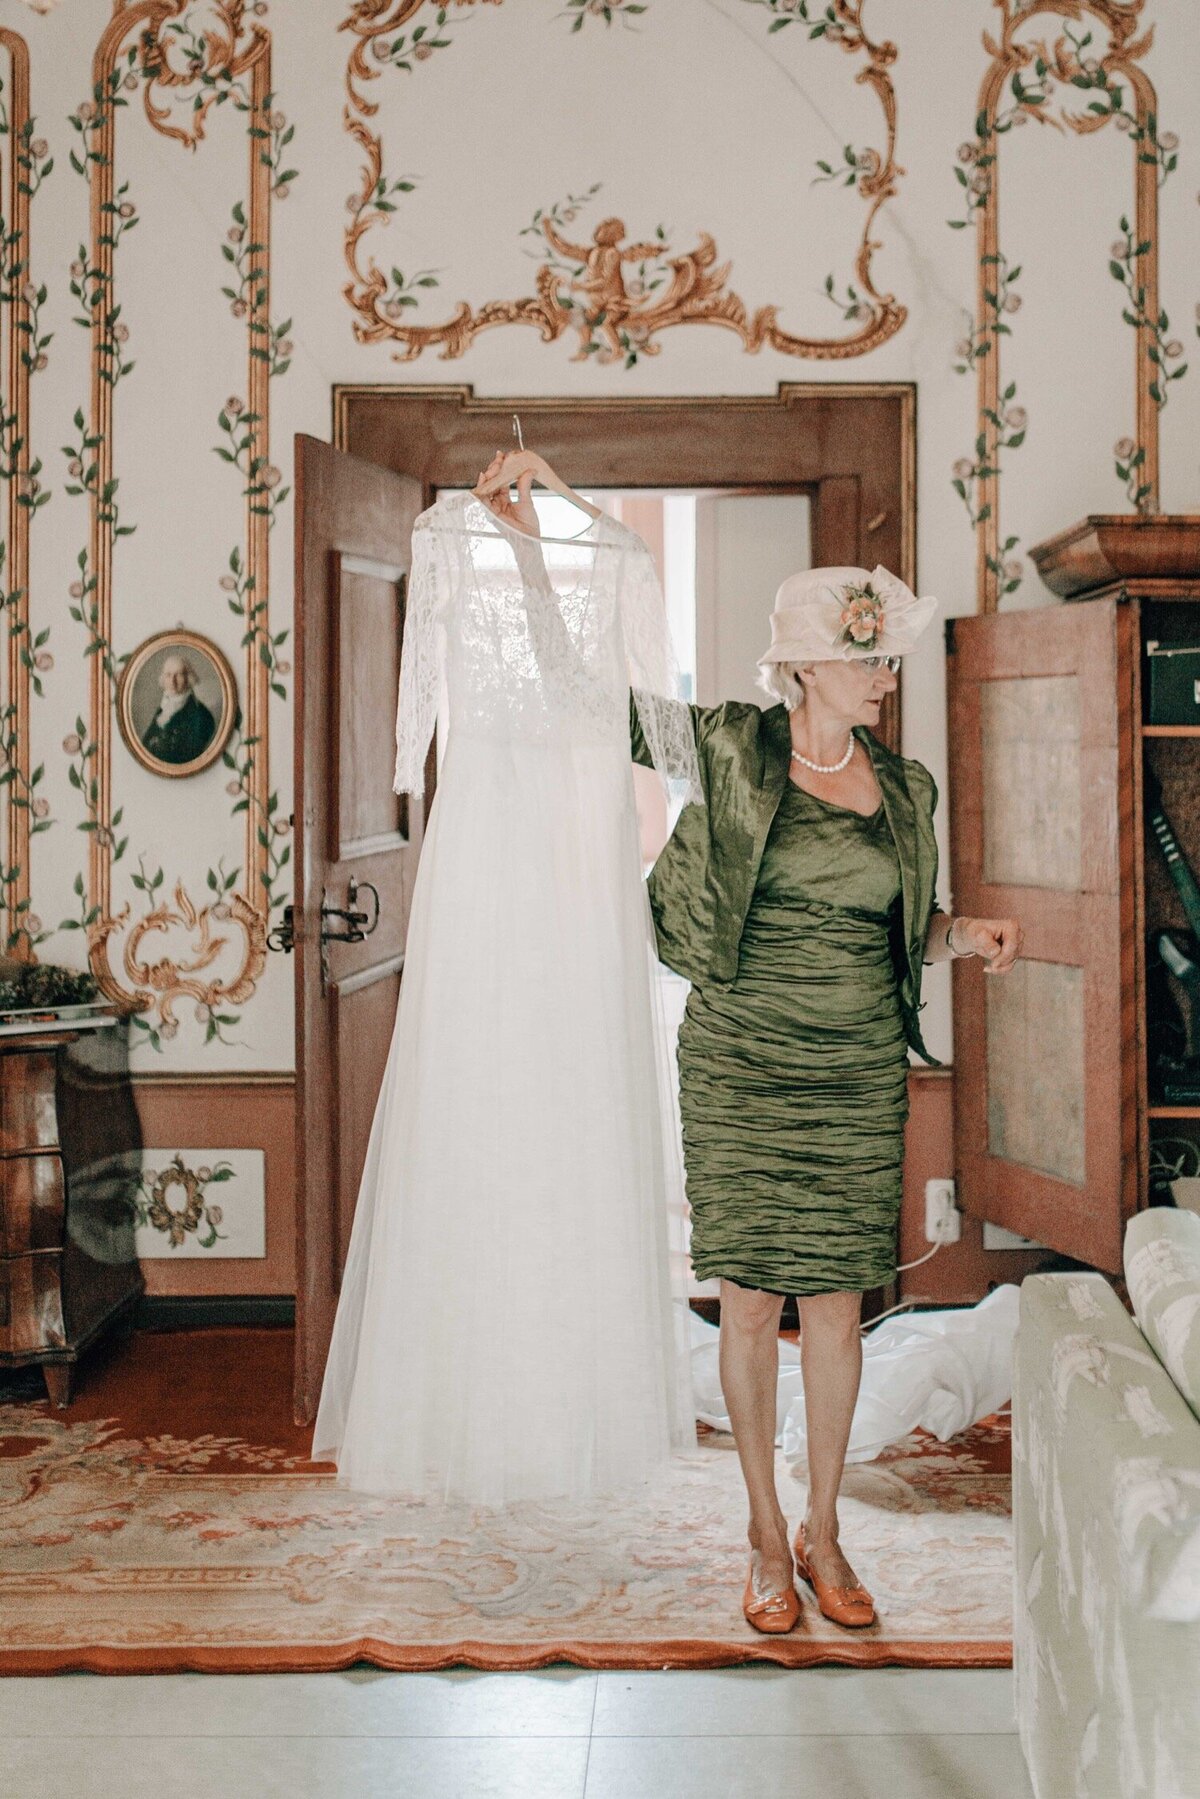 Europe_Fine_Art_Fashion_Wedding_Photographer-20_Elegant and natural castle wedding captured by fine art fashion wedding photographer Flora and Grace. An ethereal summer wedding inspired by renaissance architecture, nature and art. 